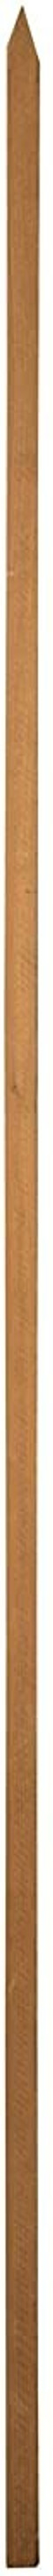 Bond Manufacturing Co 94006 4ft x 3/4in Packaged Hardwood Stakes, 0.75 x 0.75 x 4', Natural (6 Pack)